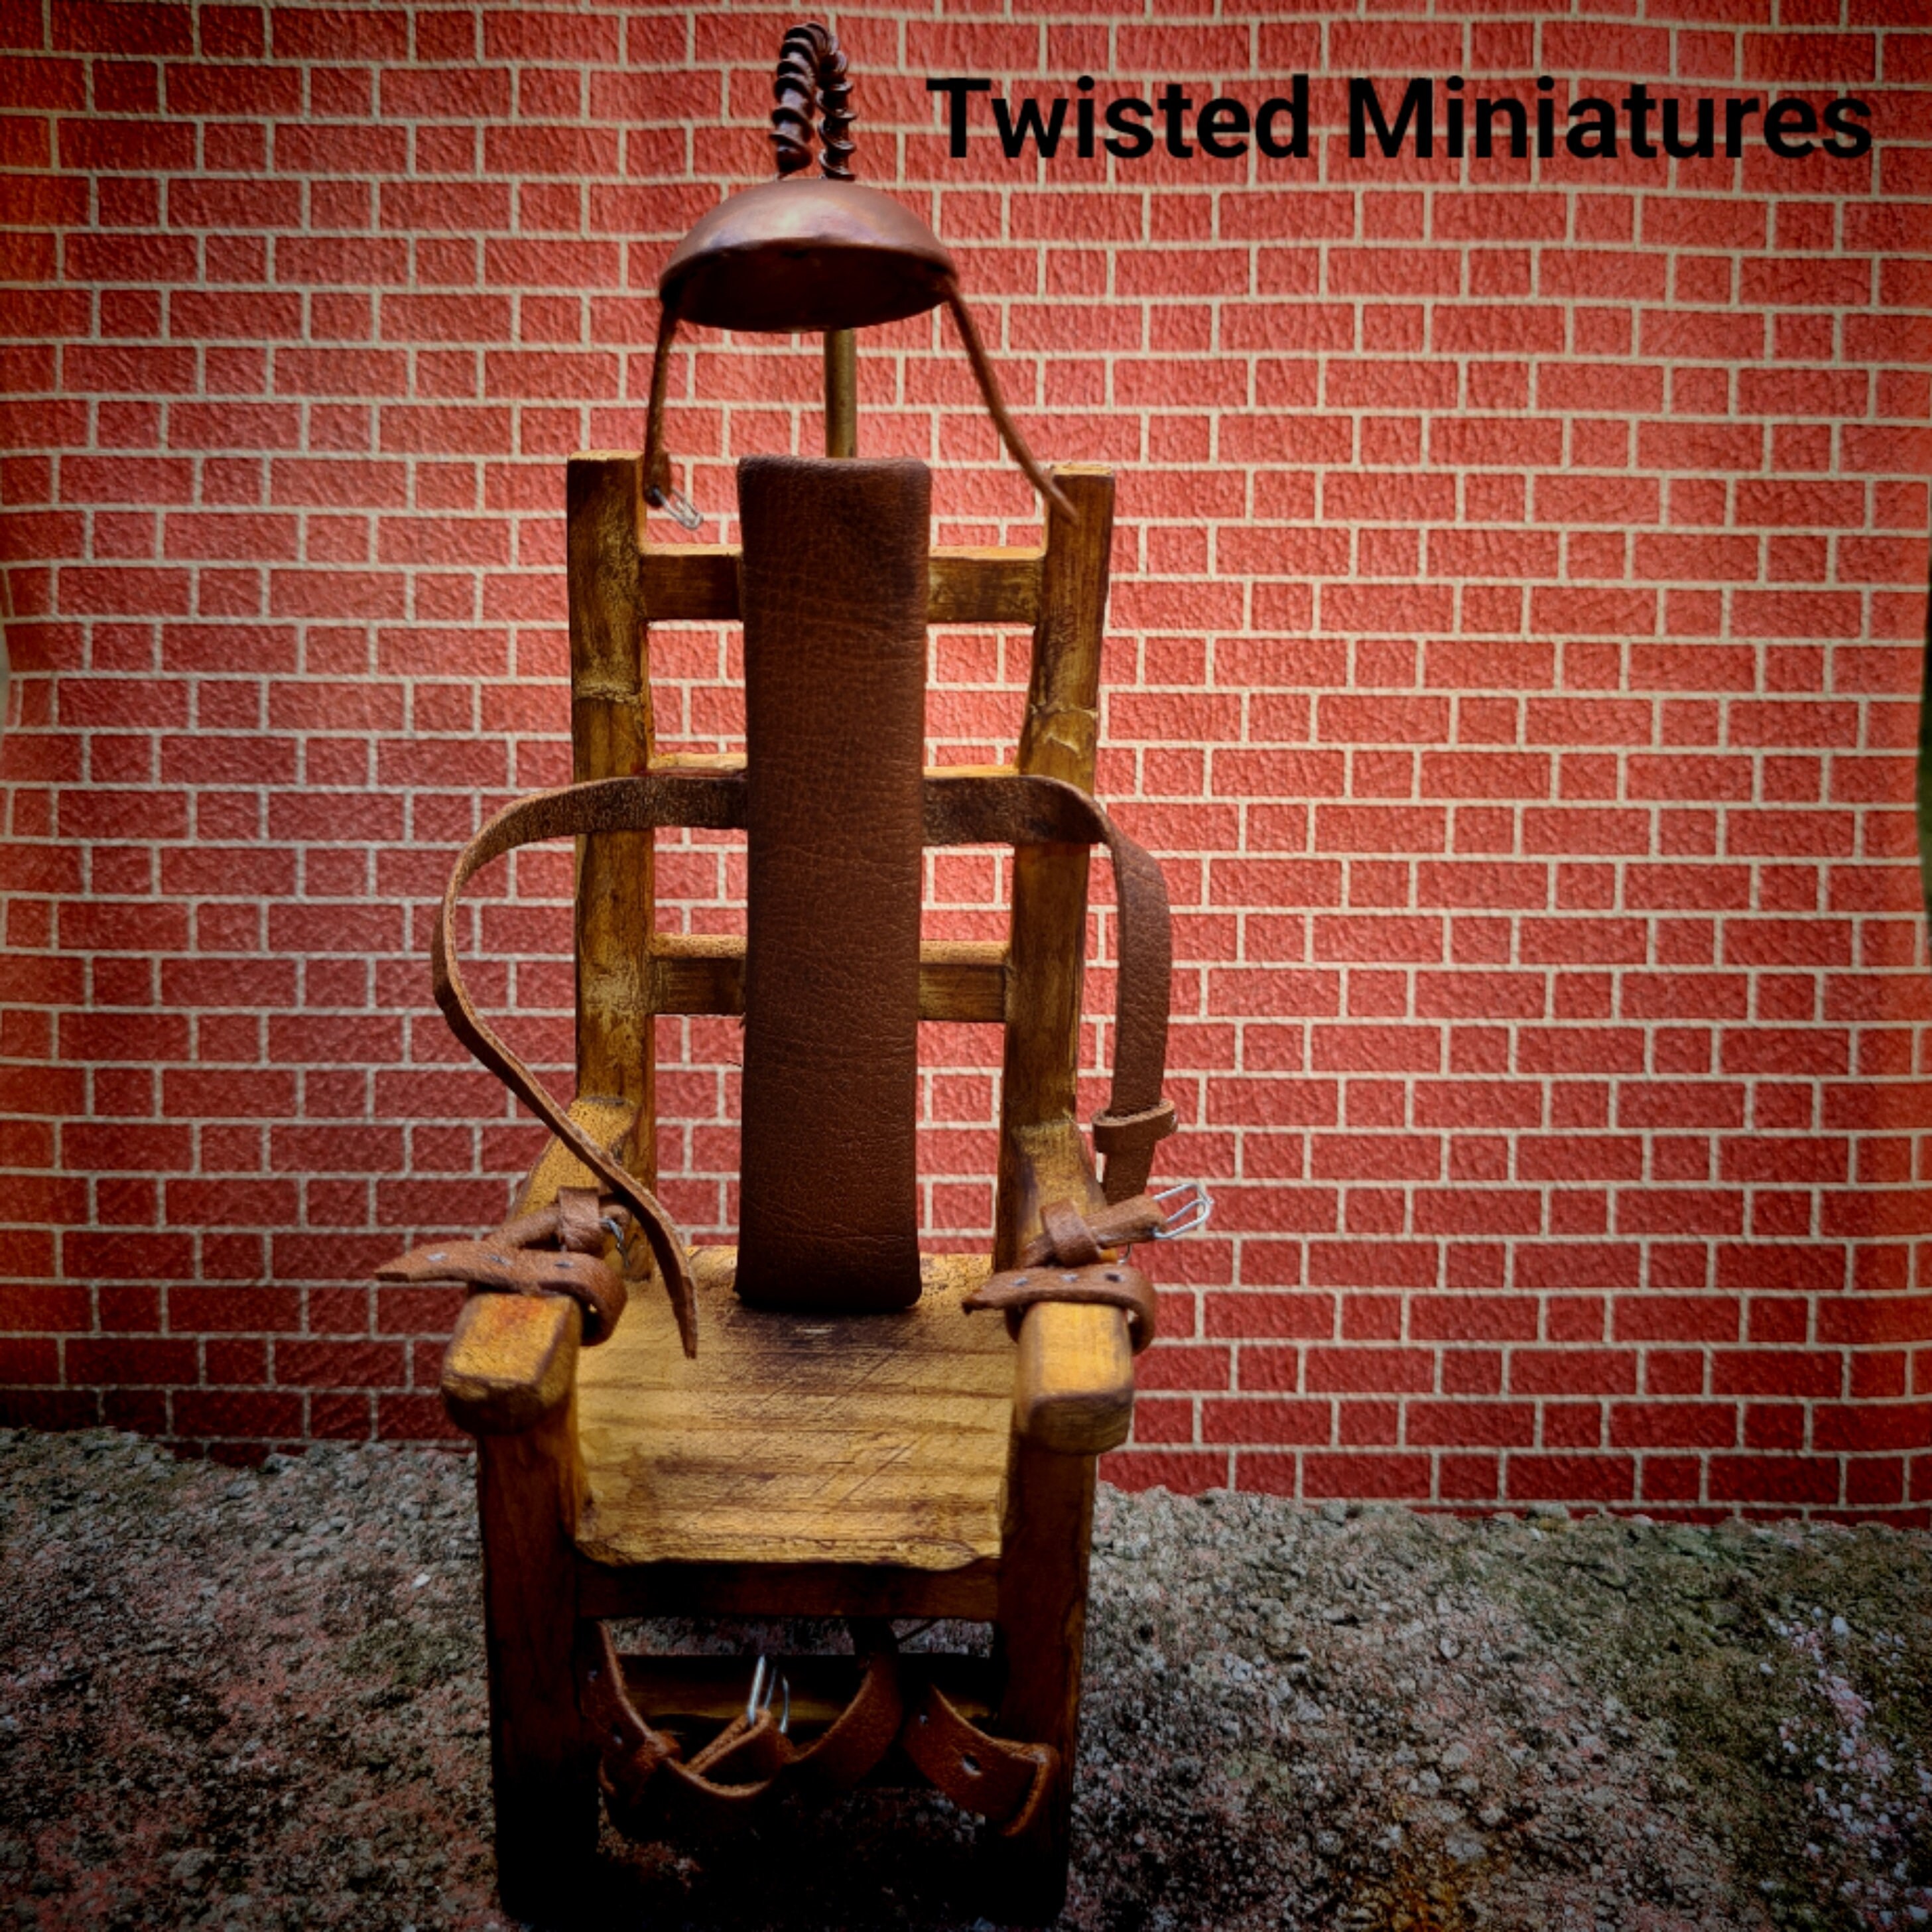 Dollhouse Miniature "Old Sparky" Electric Chair 1/12th Scale